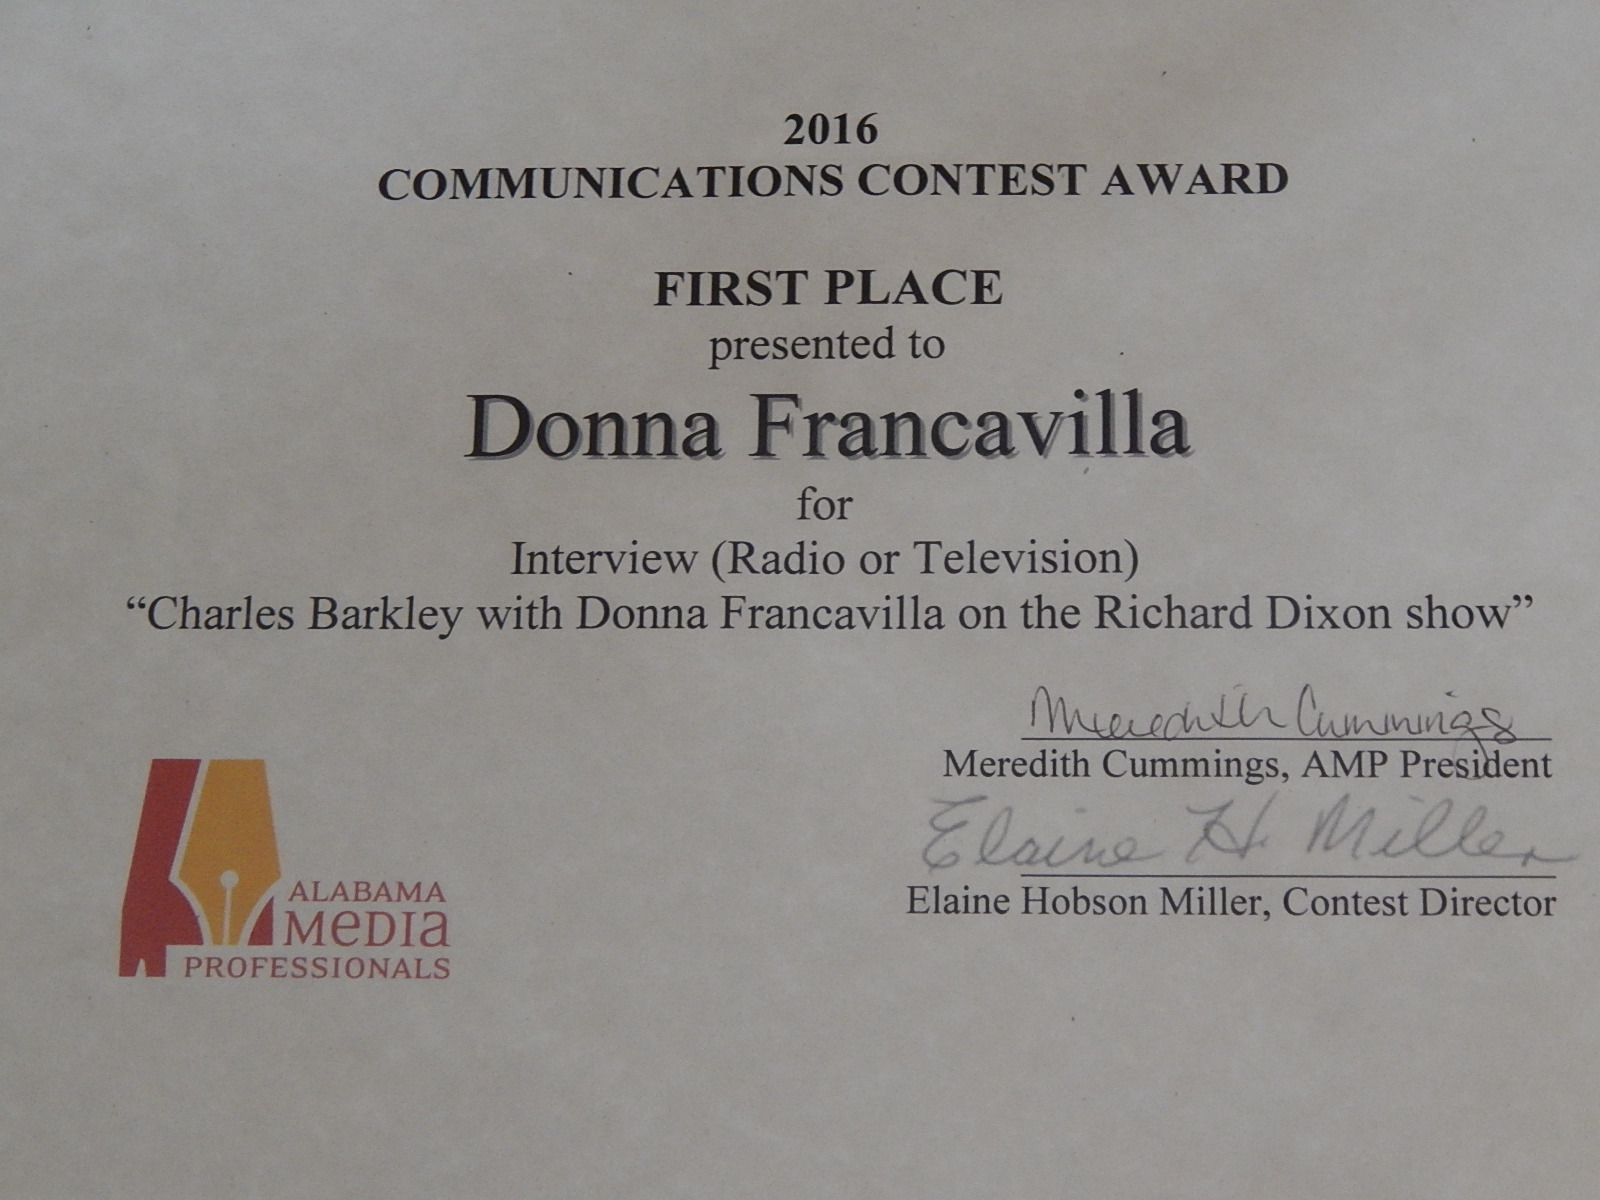 2016 Alabama Media Professionals Communications Contest Award - State Award - First Place presented to Donna Francavilla for Interview (Radio or Television) "Charles Barkley with Donna Francavilla on the Richard Dixon Show"